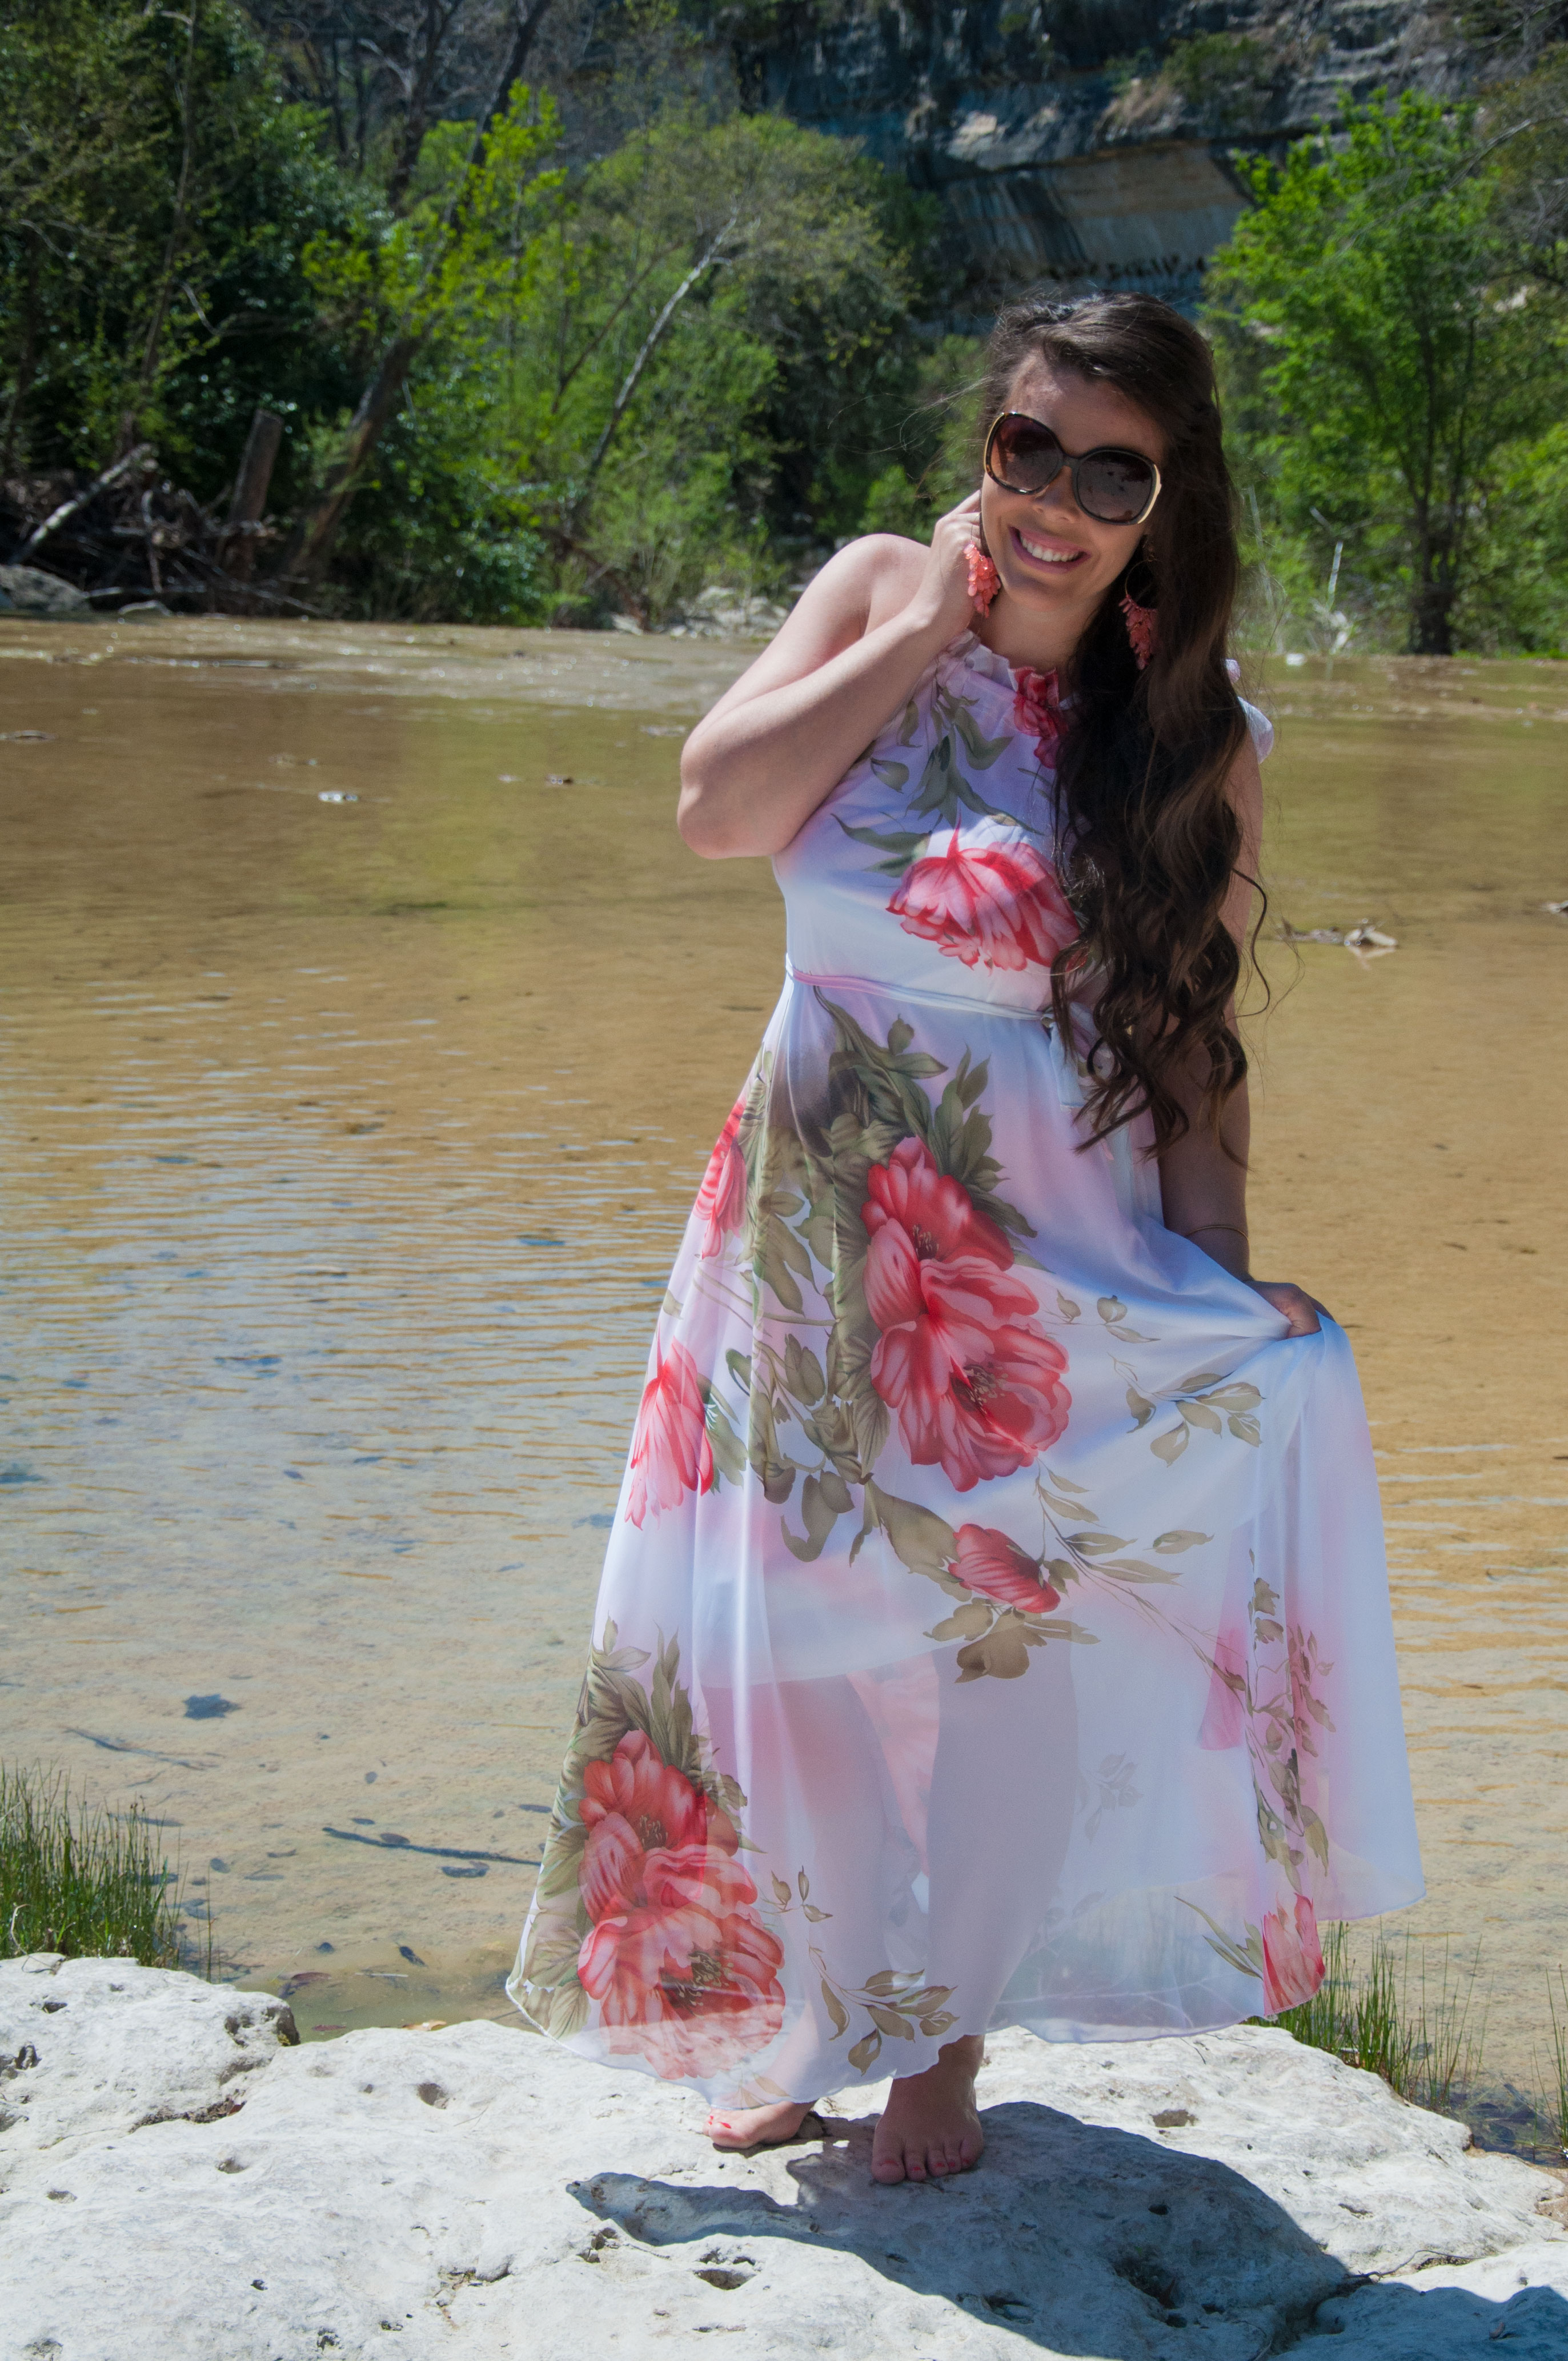 Floral chiffon maxi dress with big earrings